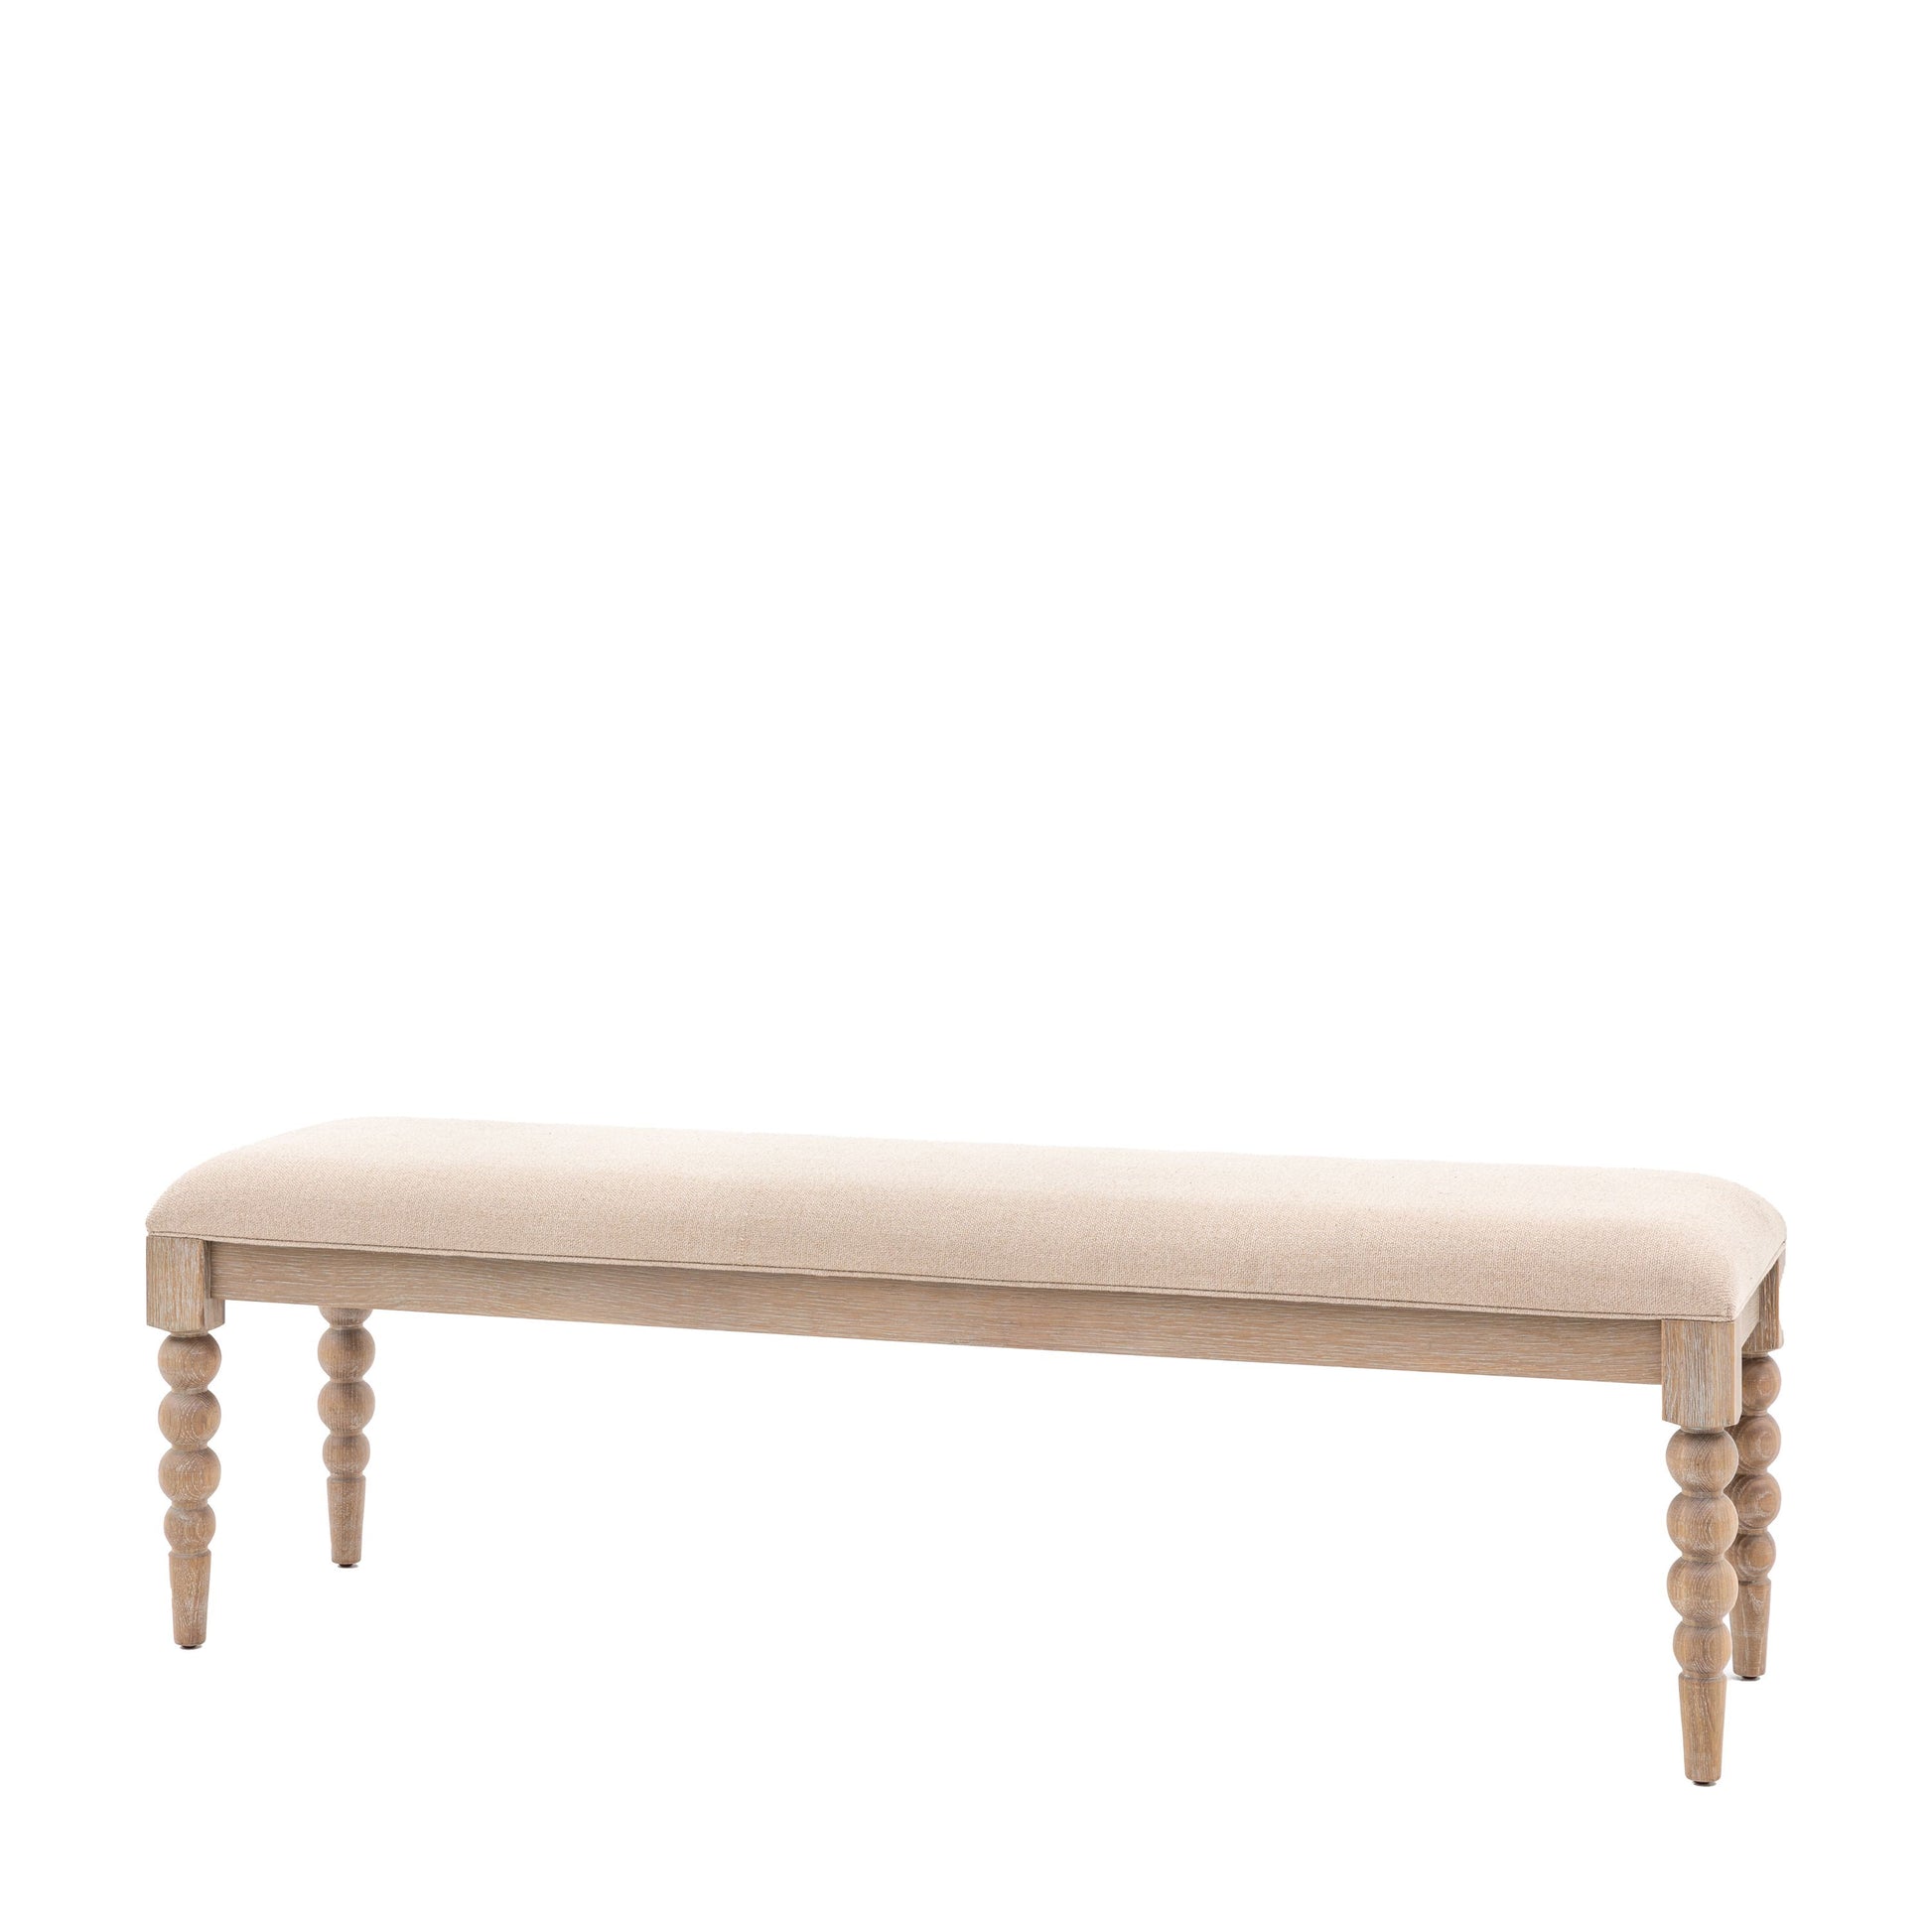 wren bench  material footstool  material benc  FOOTSTOOL  foot stool  dining bench  Bobble Footstool  Bobbin footstool  bed stool